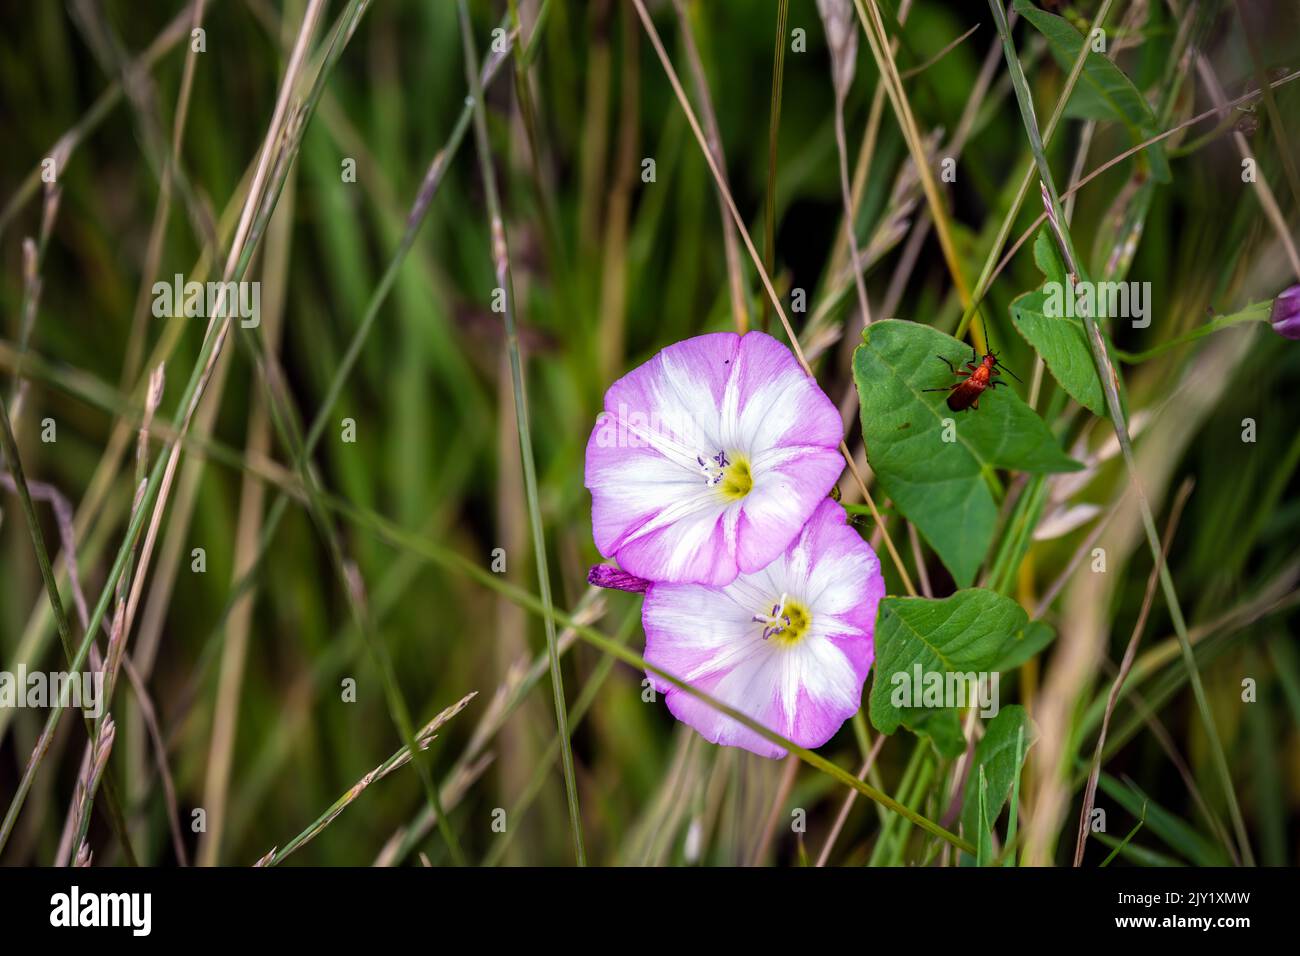 Trumpet-shaped white and pink flowers of field bindweed or Convolvulus arvensis L, close up Stock Photo